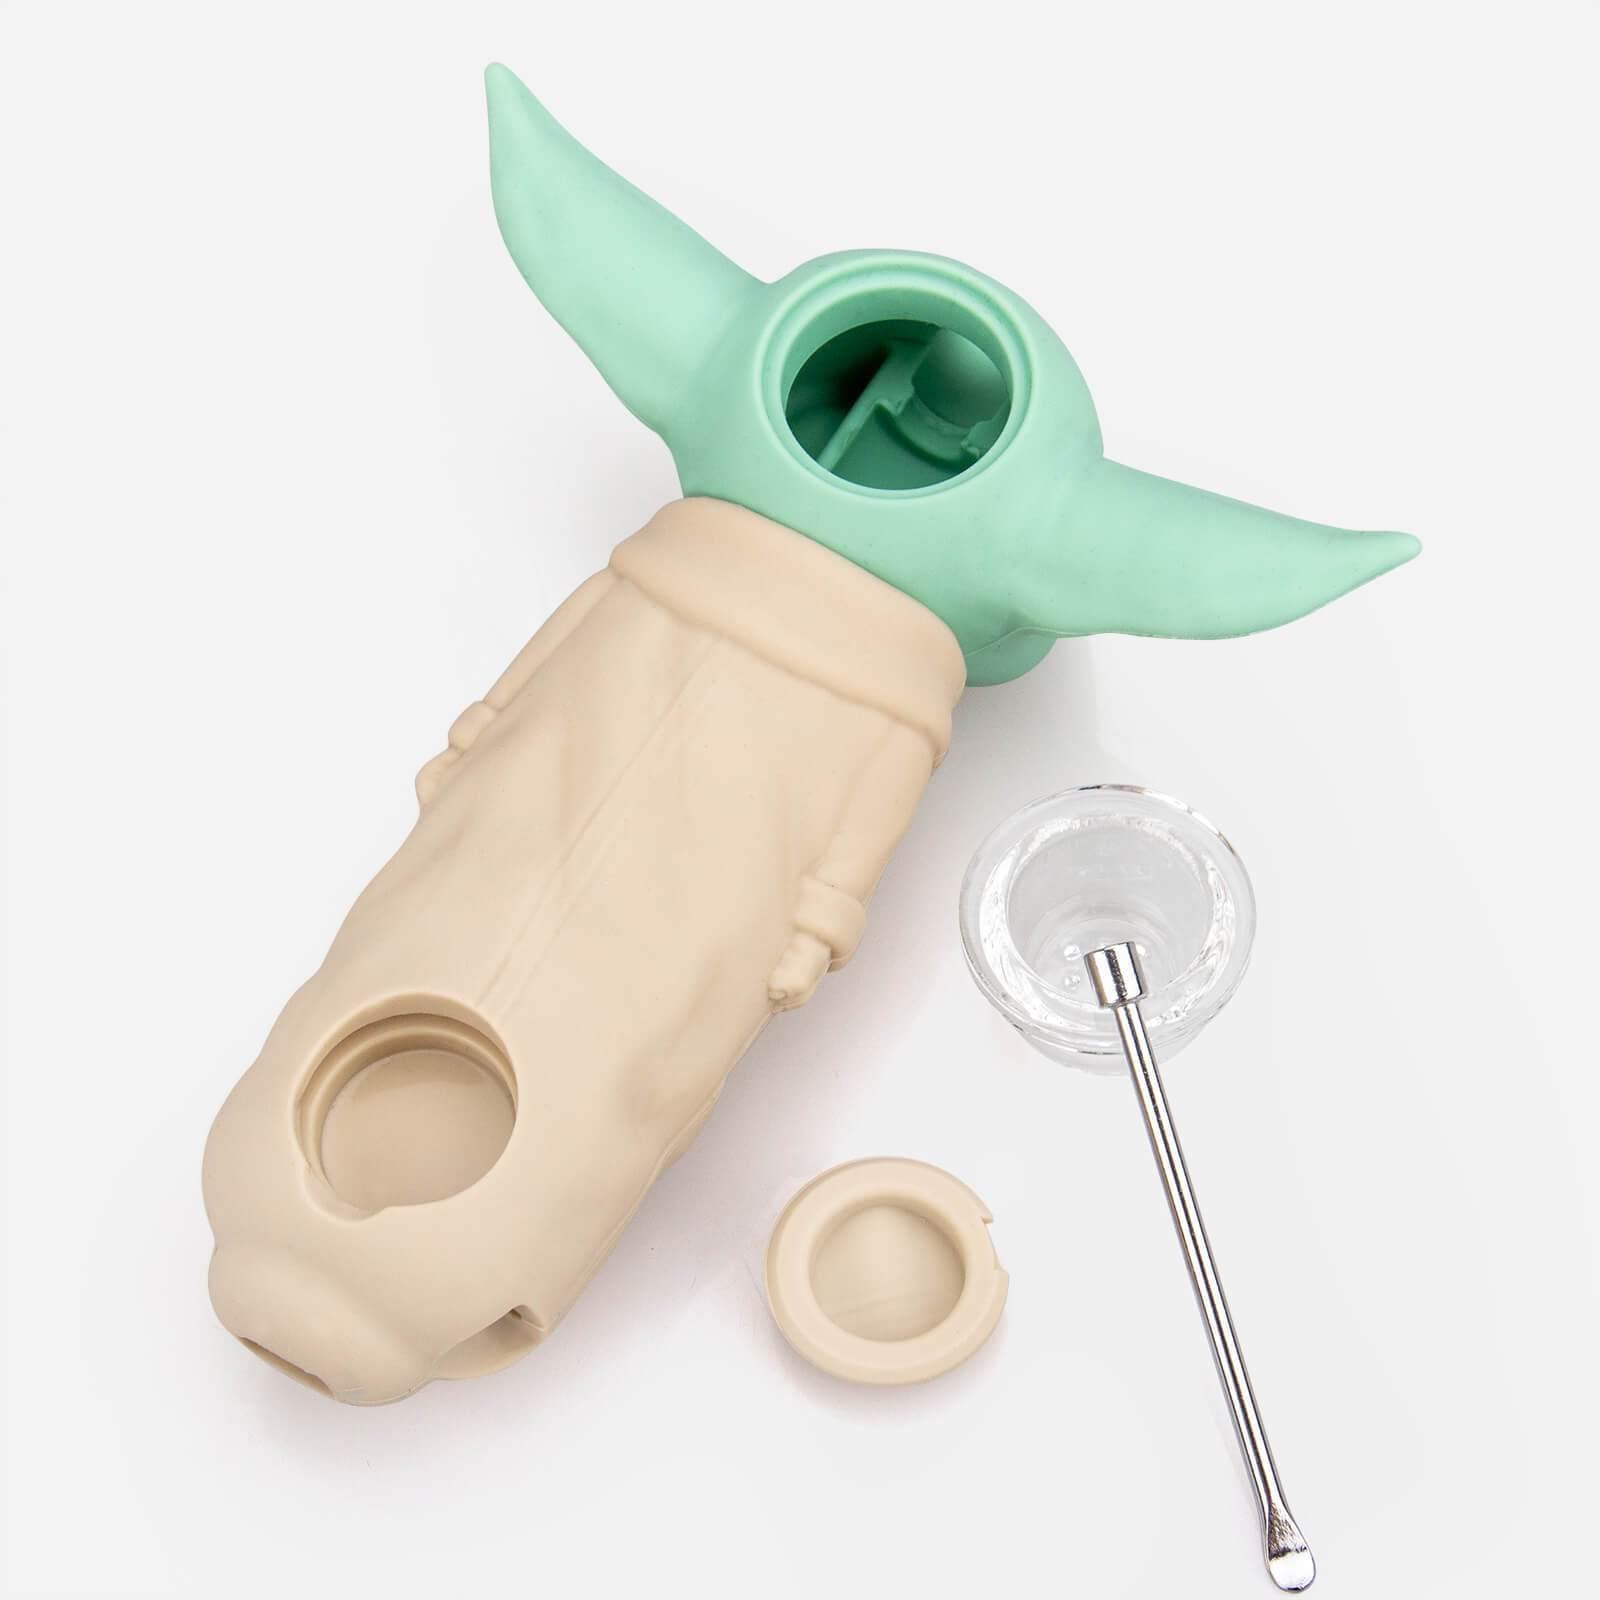 Baby Yoda Portable Silicone Hand Pipe - PILOT DIARY